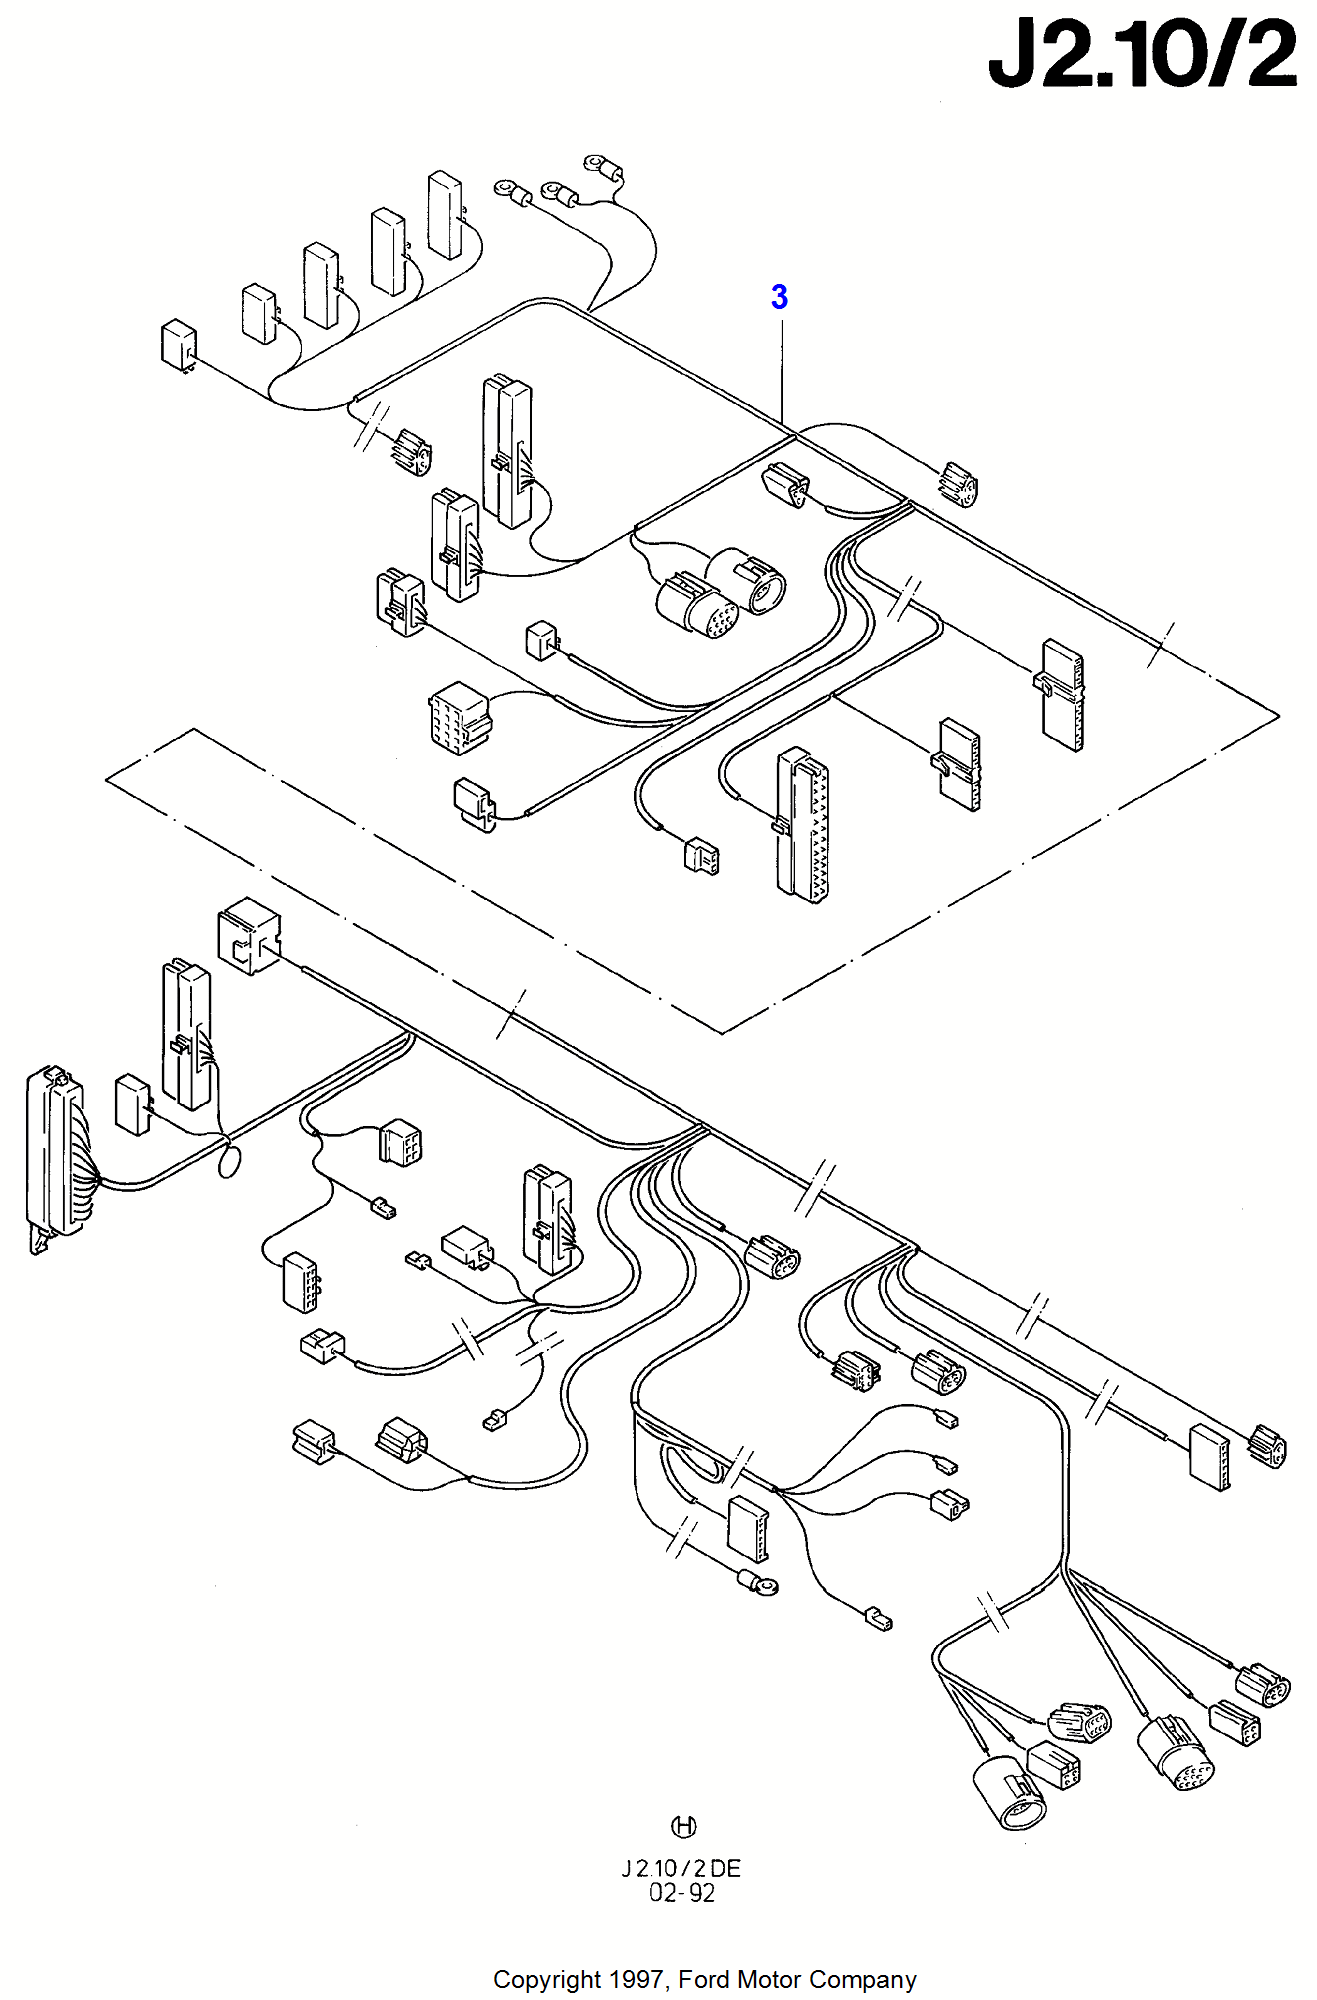 2000 Mustang V6 Spark Plug Wiring Diagram from ford.7zap.com